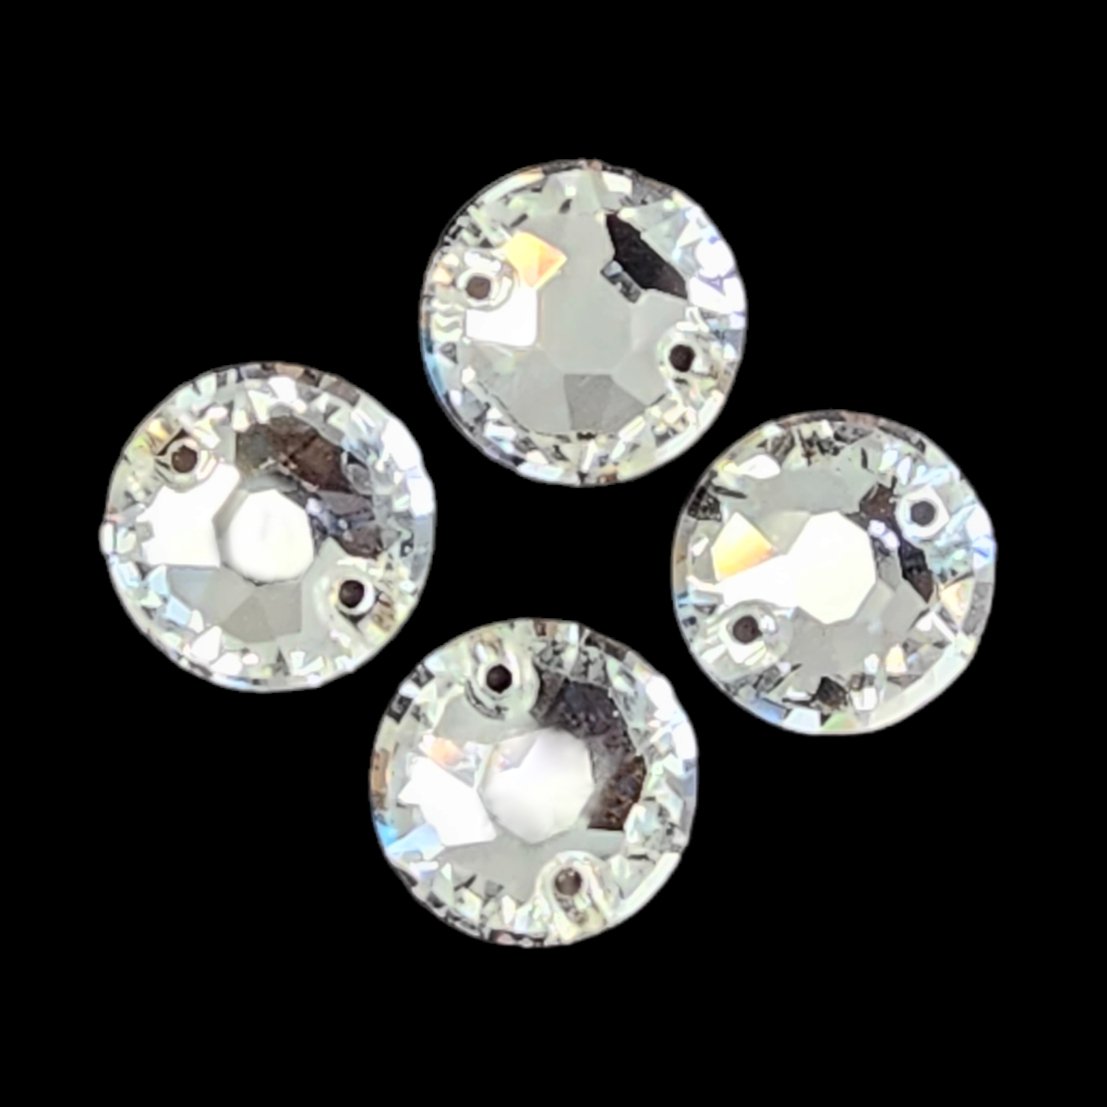 Fancy LUXE Glass Crystal XIRIUS SHAPED Sew On Rhinestones - Crystal Xirius Sew On Rhinestones - Sew On Rhinestones - Xirius